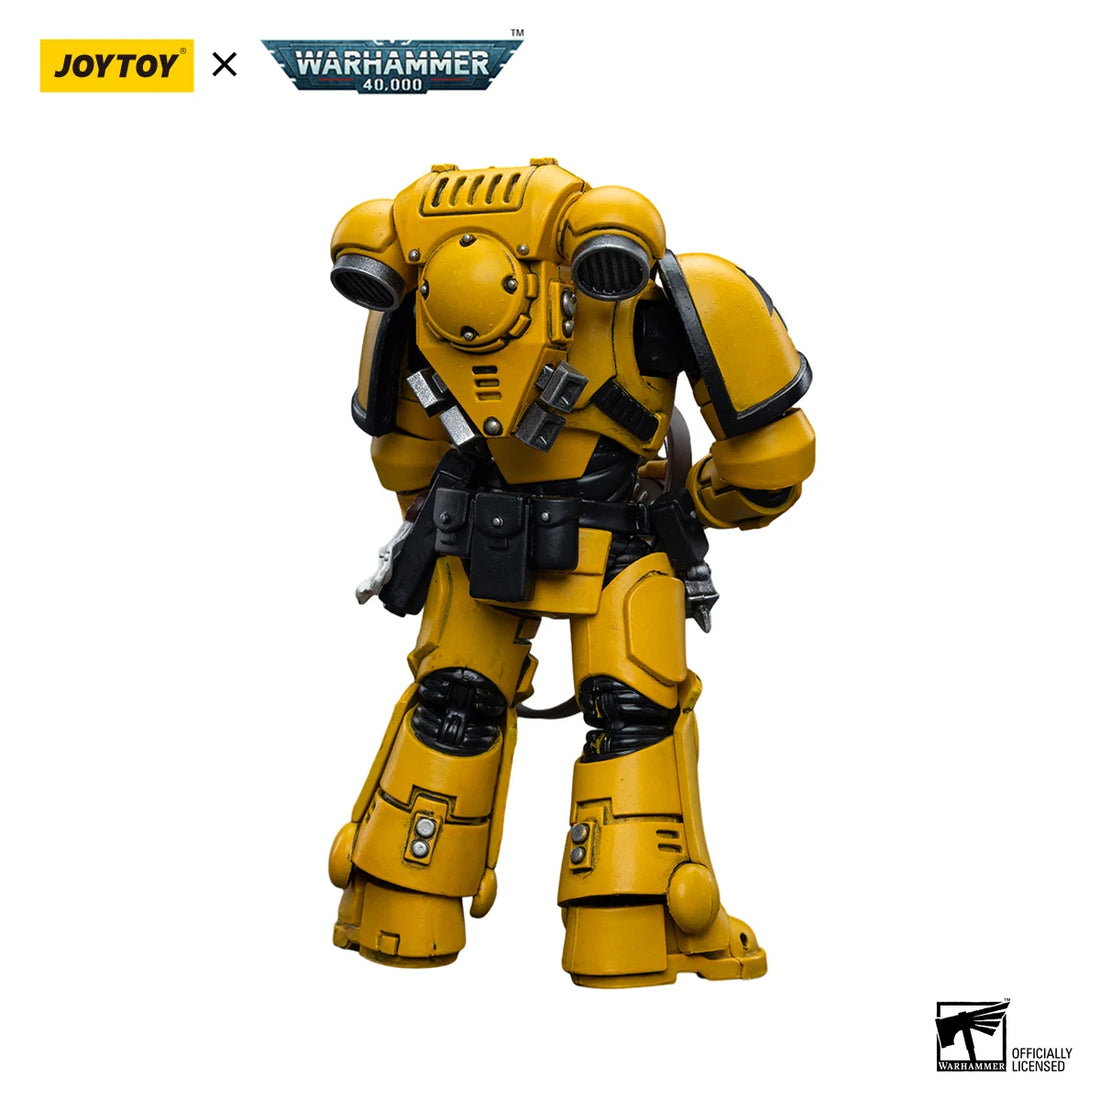 [IN STOCK] NEW 1/18 JOYTOY Warhammer 40K Action Figures Imperial Fists Intercessors Anime Model Toy